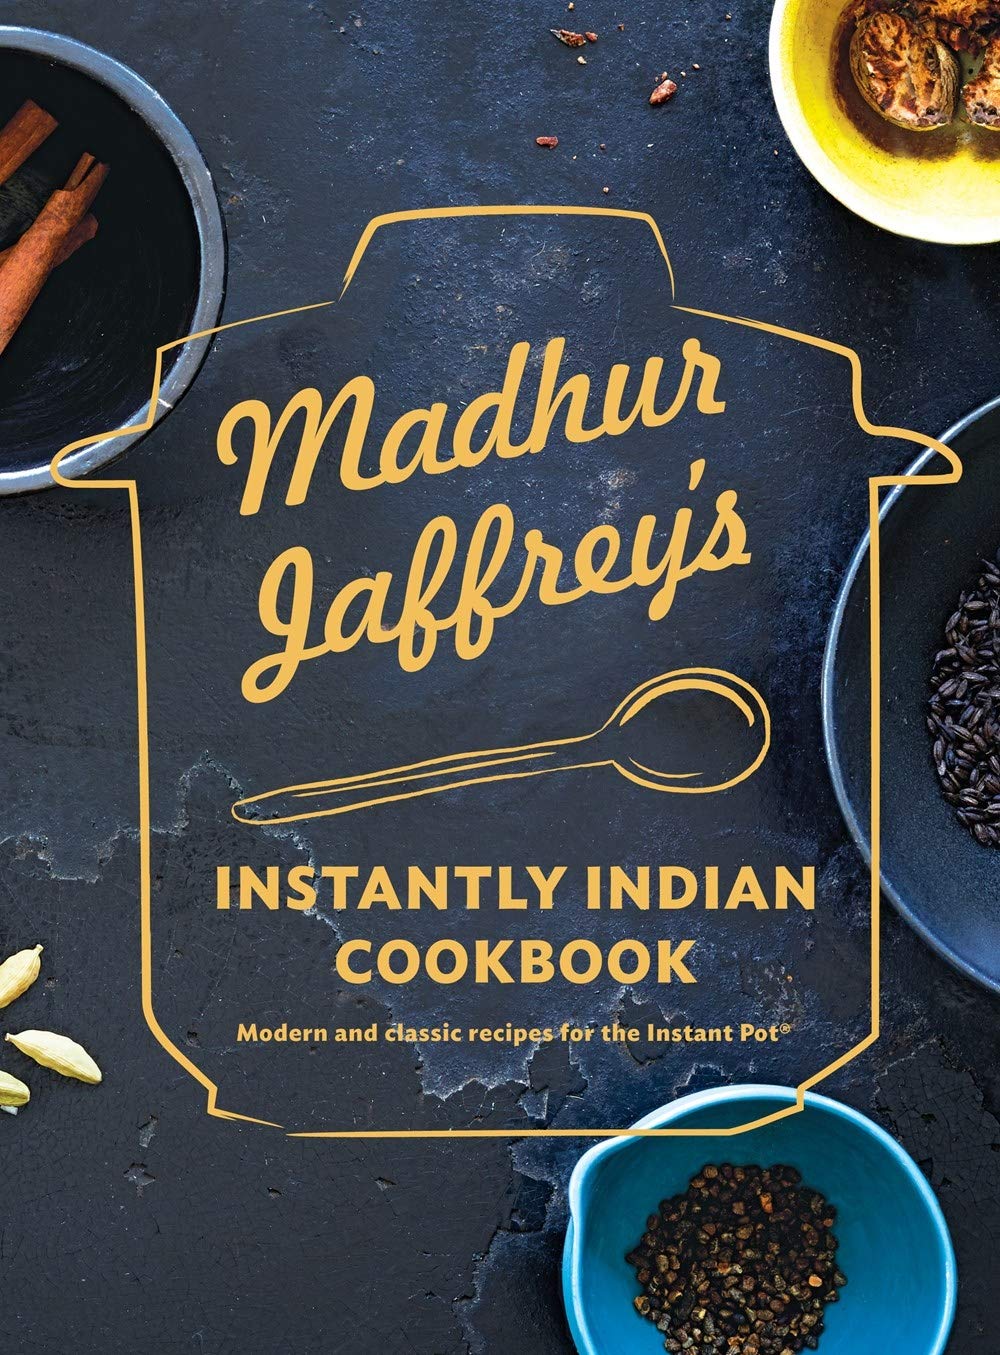 Madhur Jaffrey's Instantly Indian Cookbook: Modern and Classic Recipes for the Instant Pot (Madhur Jaffrey)